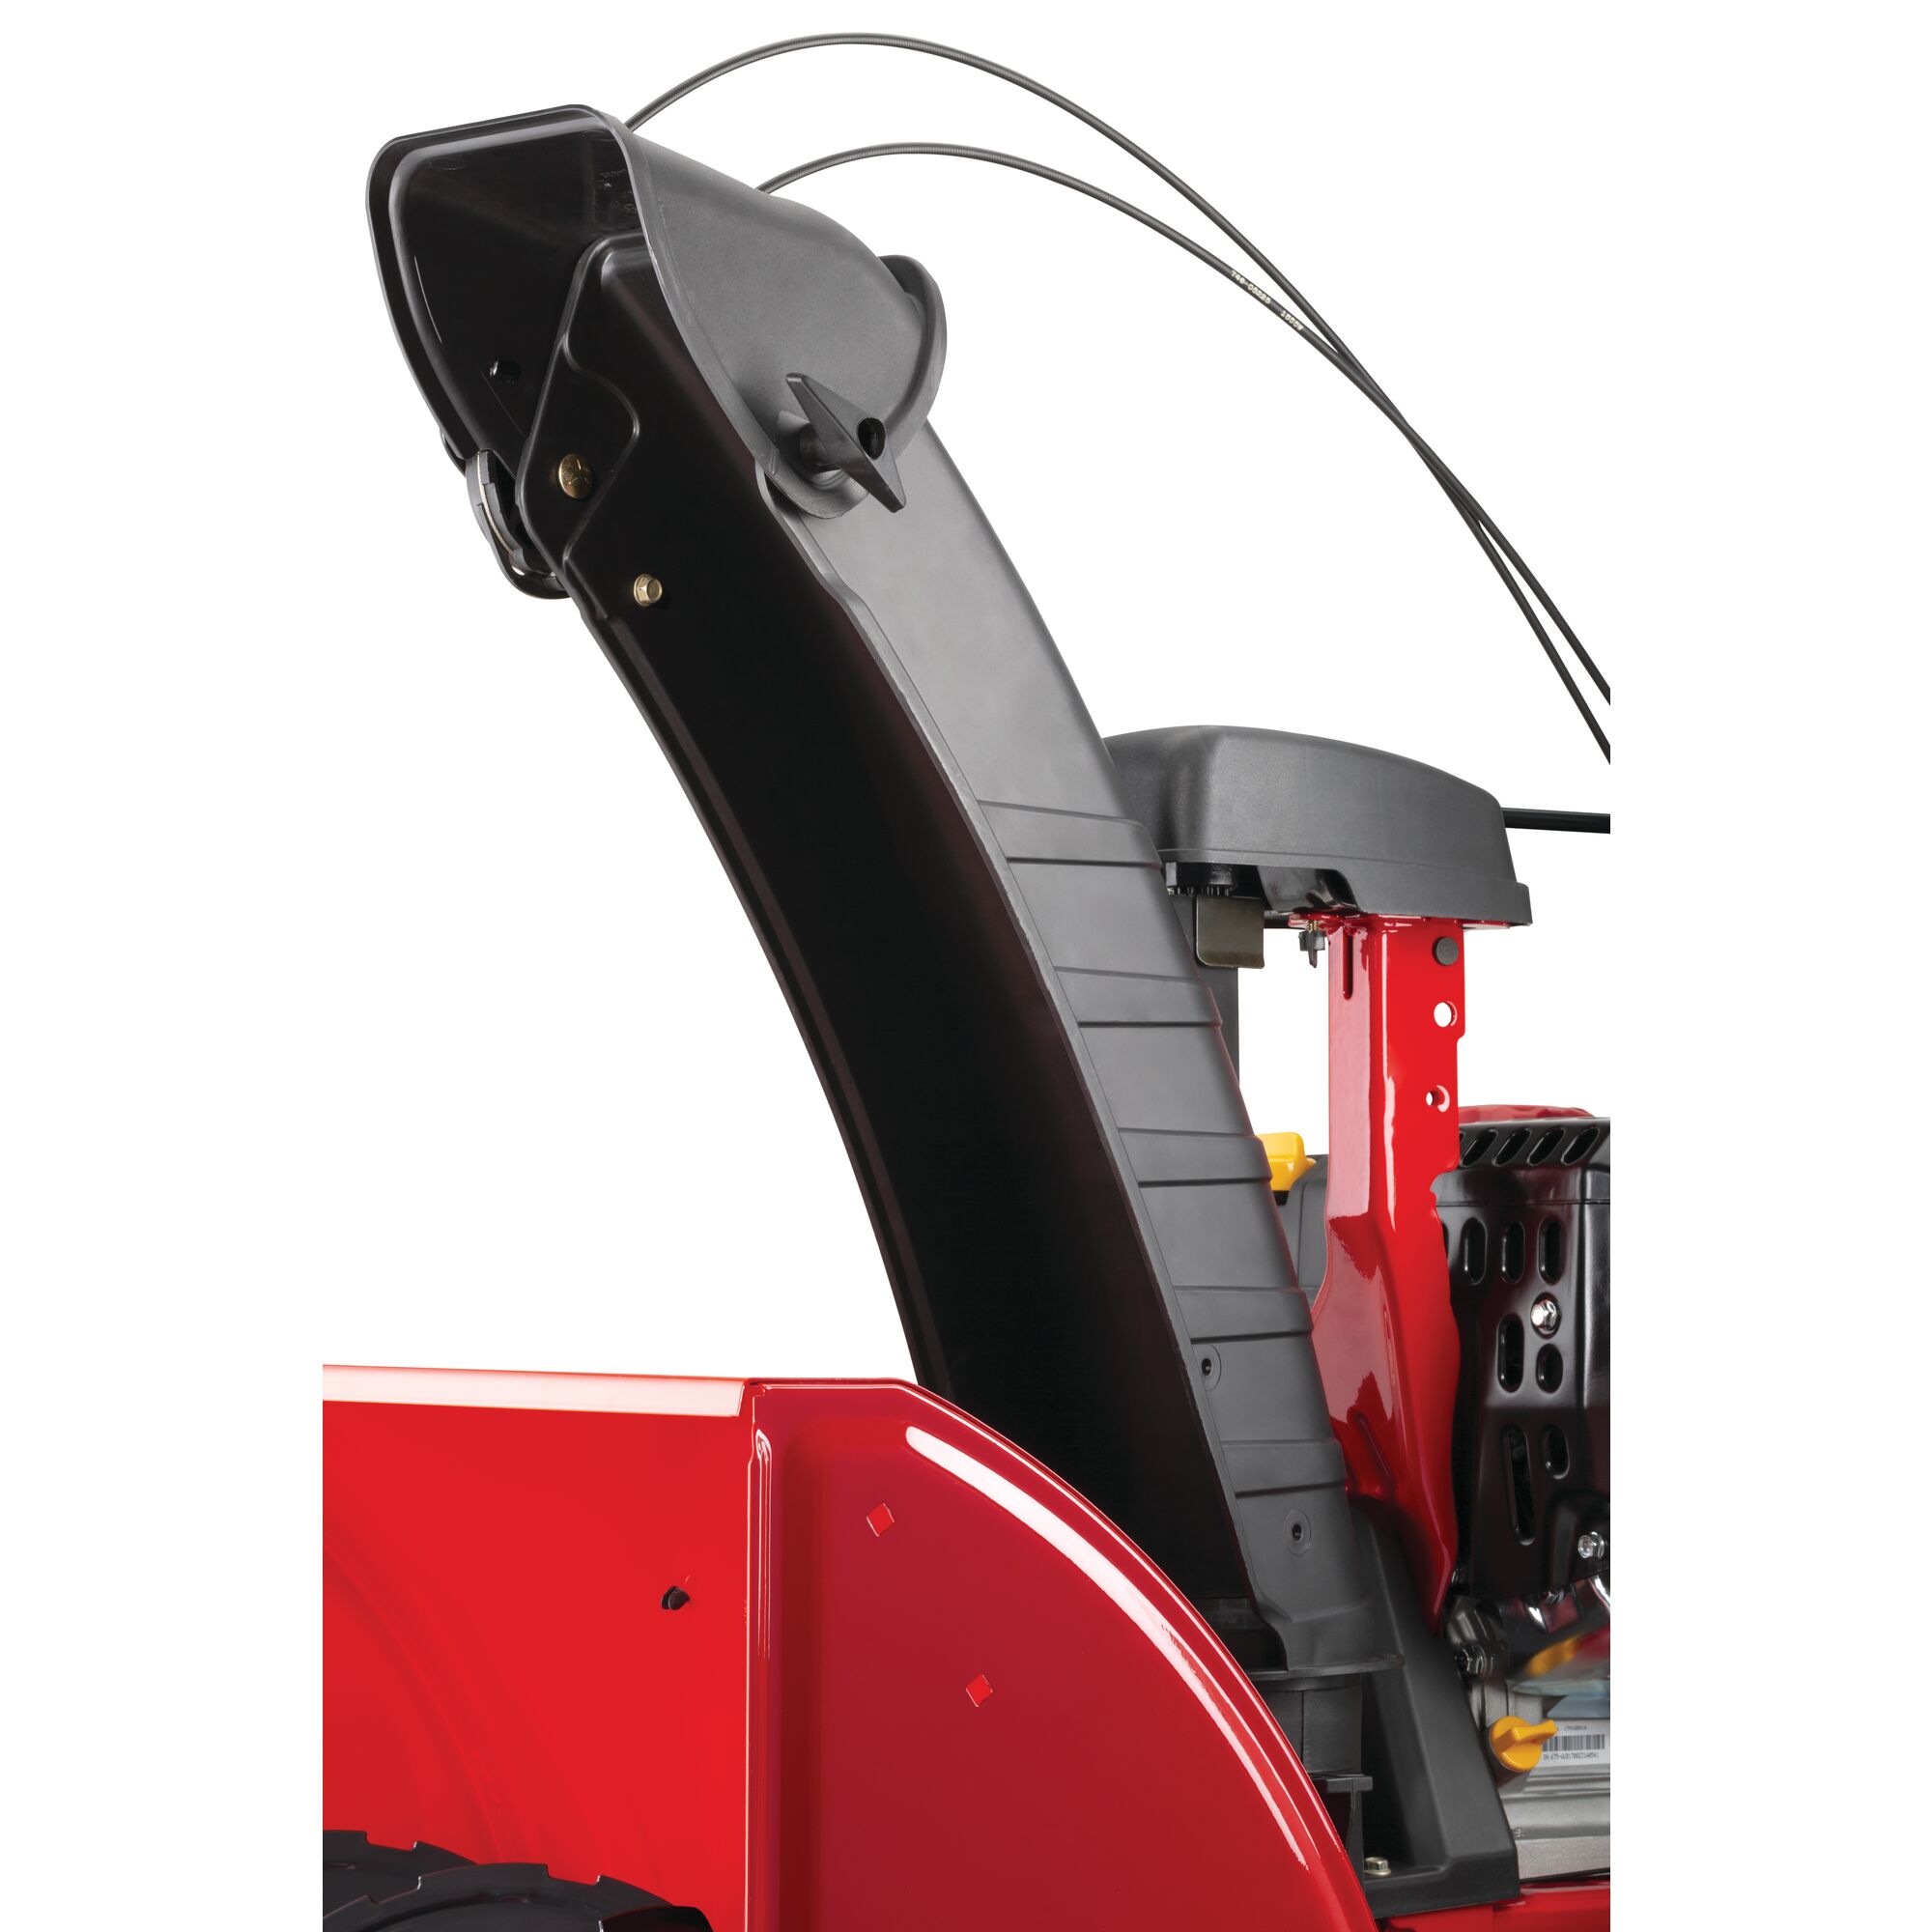 Electric chute control feature in 28 inch 243 CC electric start two stage snow blower.